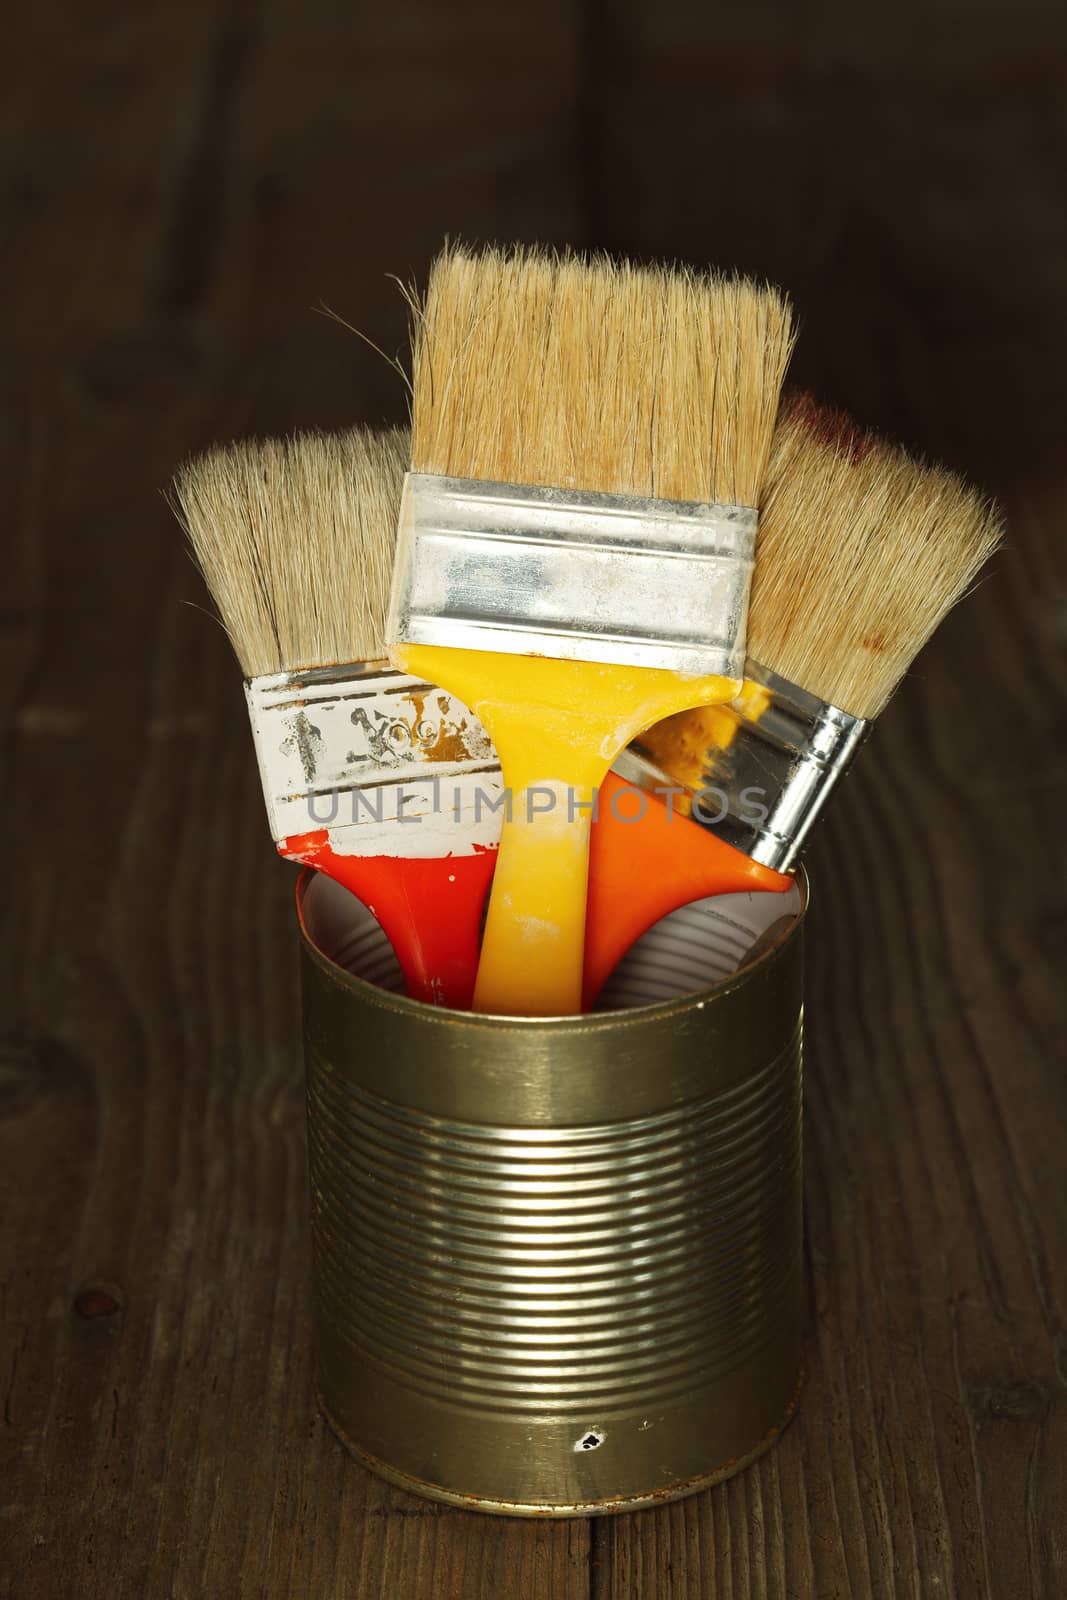 Three clean paint brushes in tin can